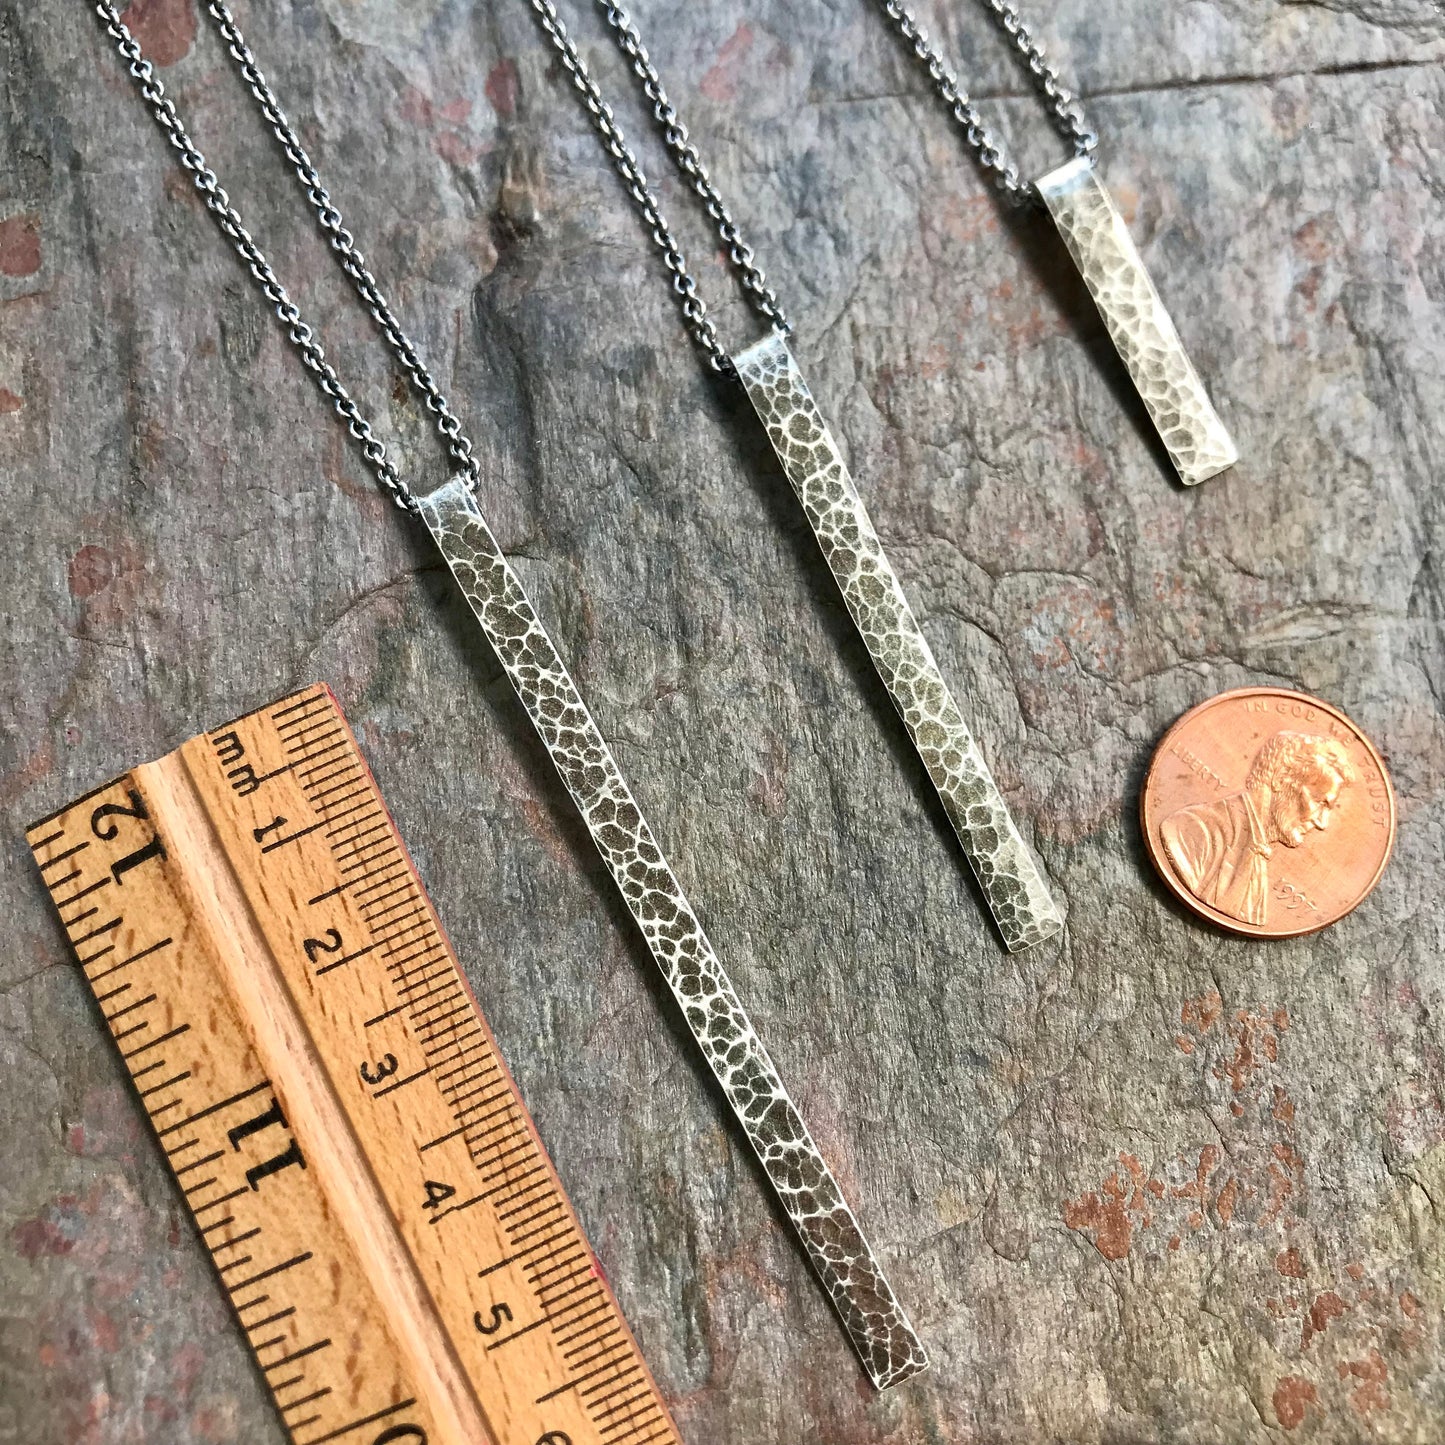 Long Sterling Silver Bar Necklace - Handmade Hammered Sterling Silver Pendant Suspended on Sterling Silver Chain